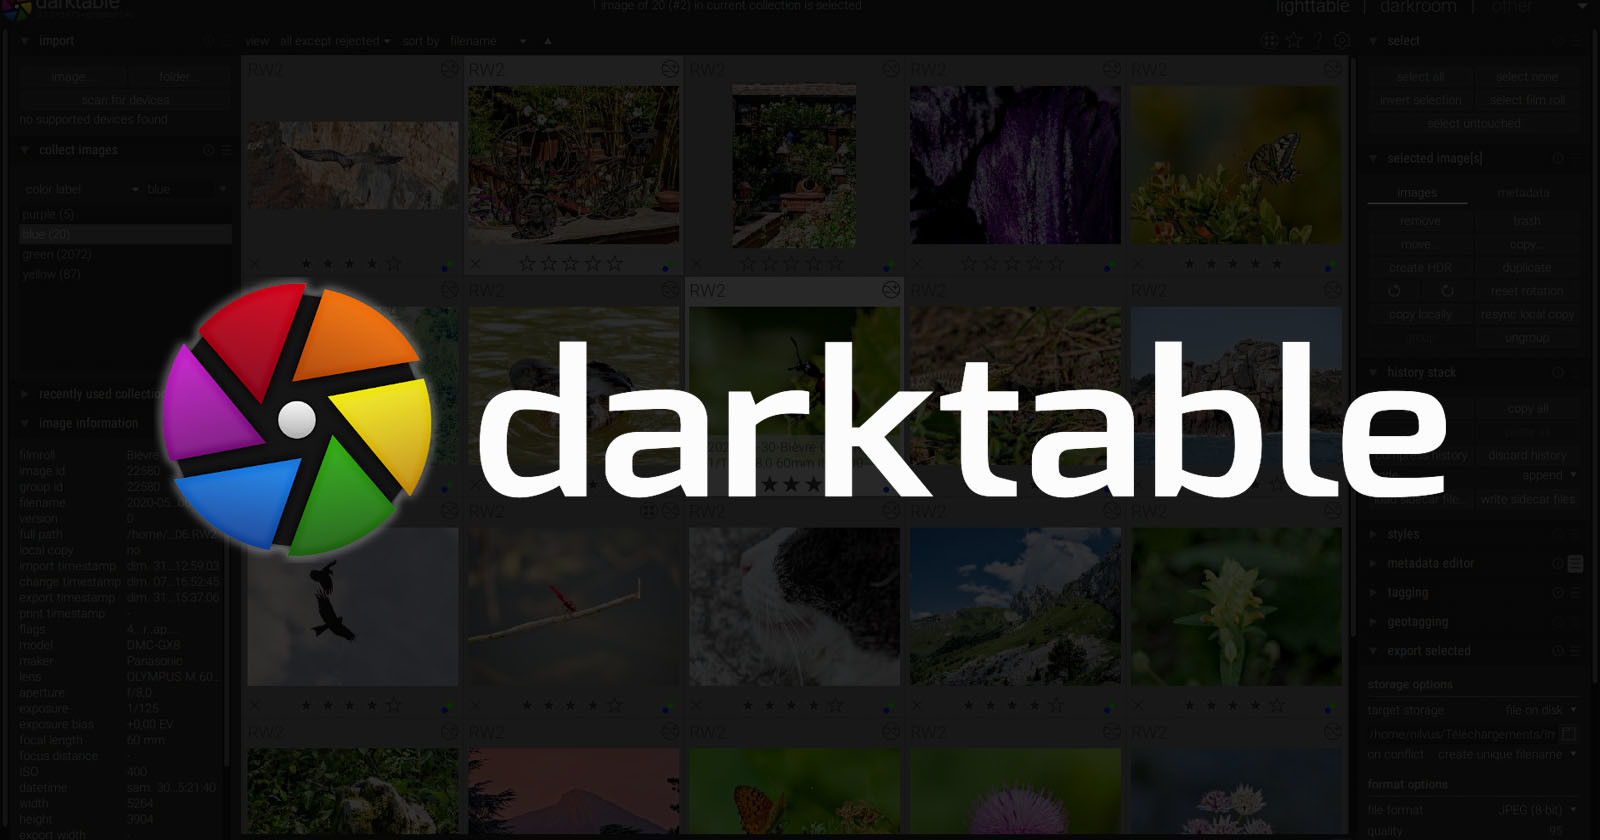 Darktable is at Risk of Dropping Support for macOS